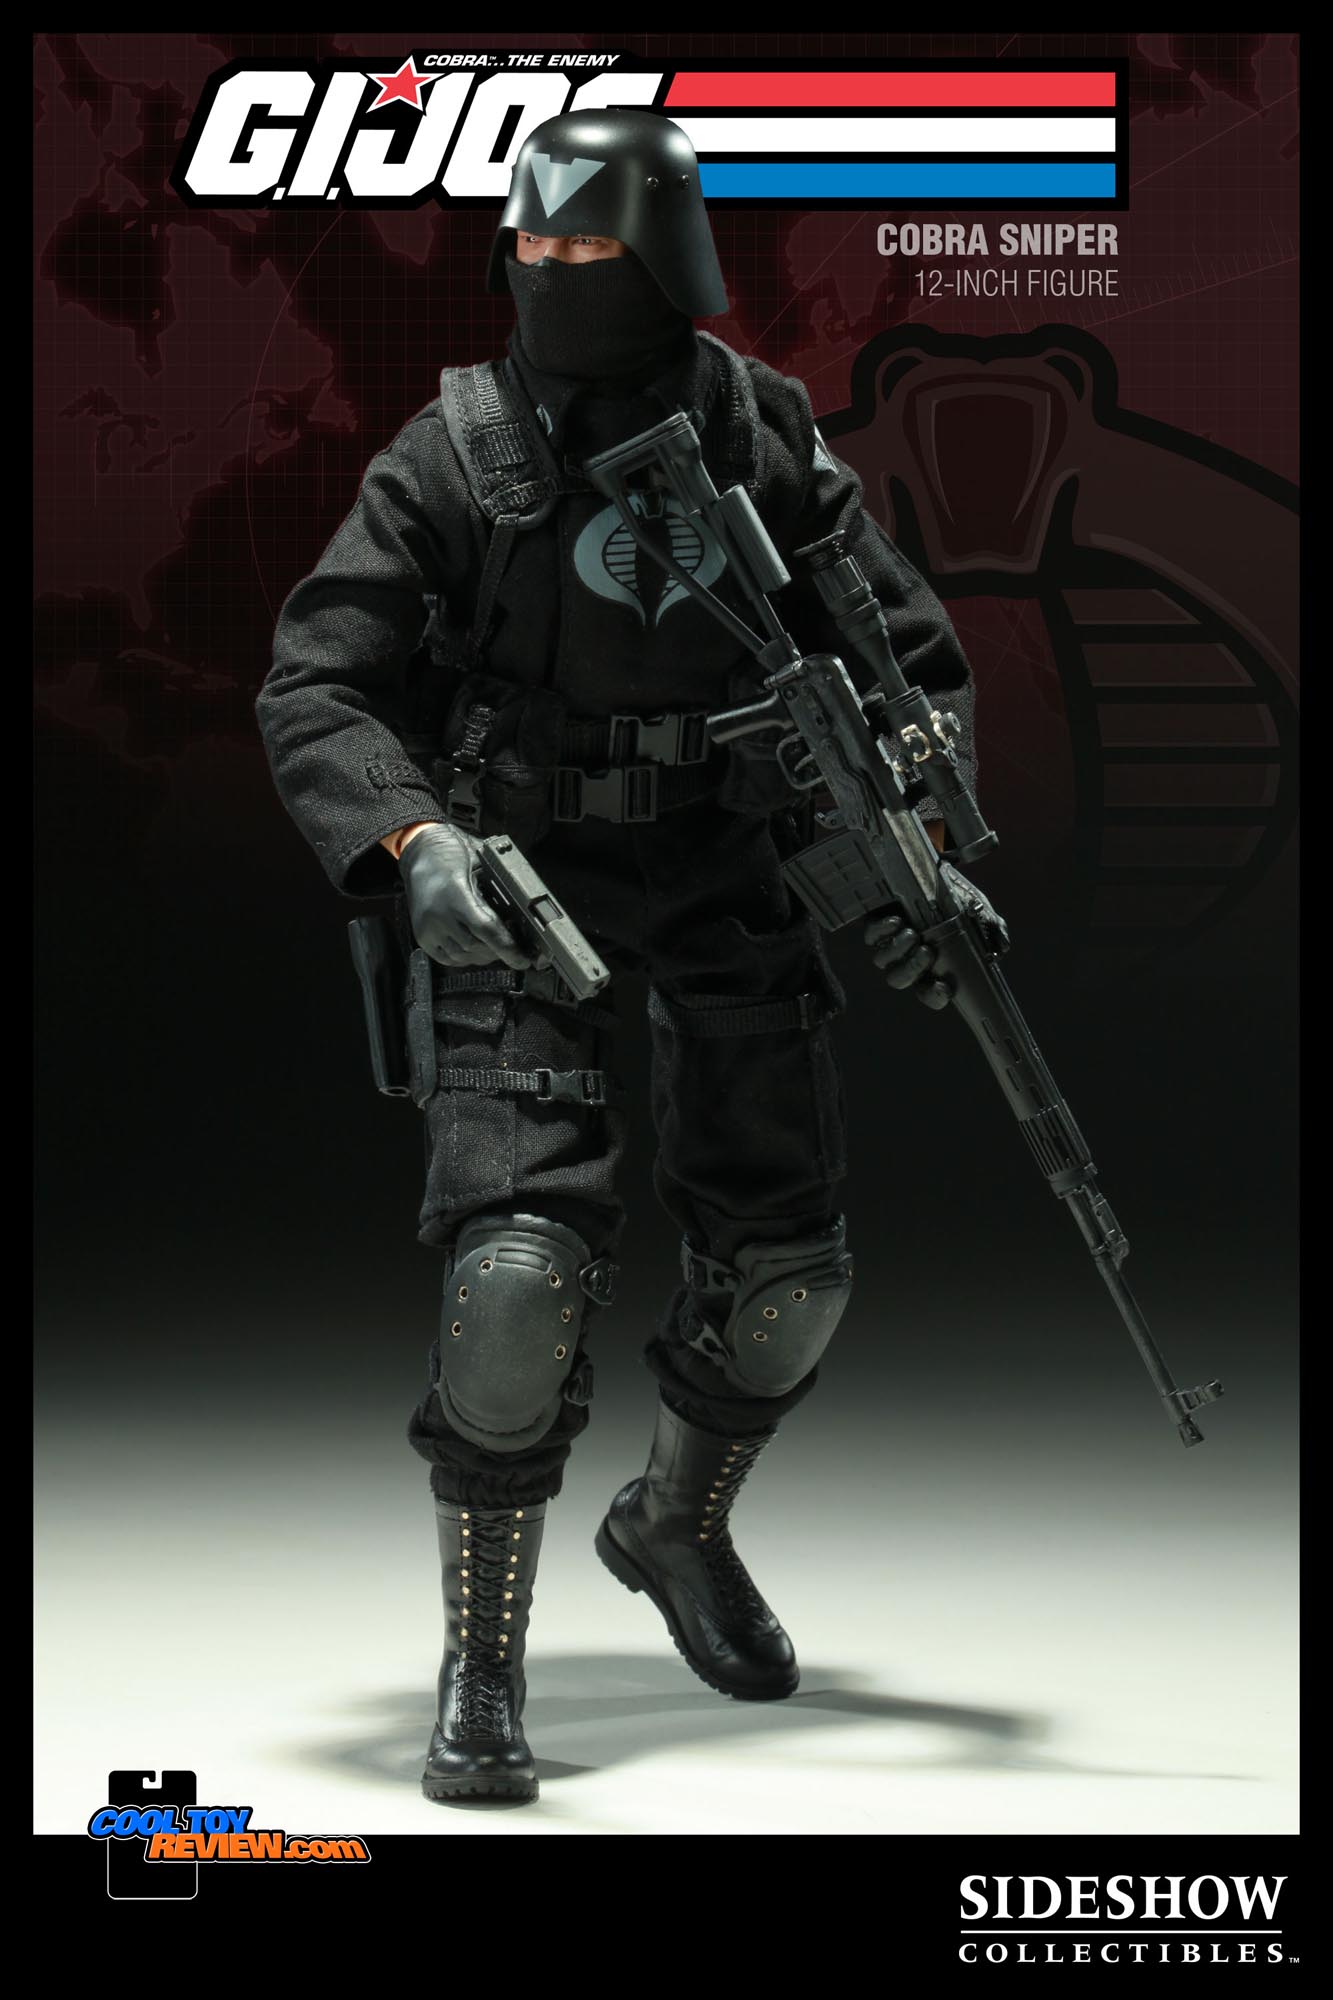 The Cobra Sniper 1/6 scale figure by Sideshow Collectible